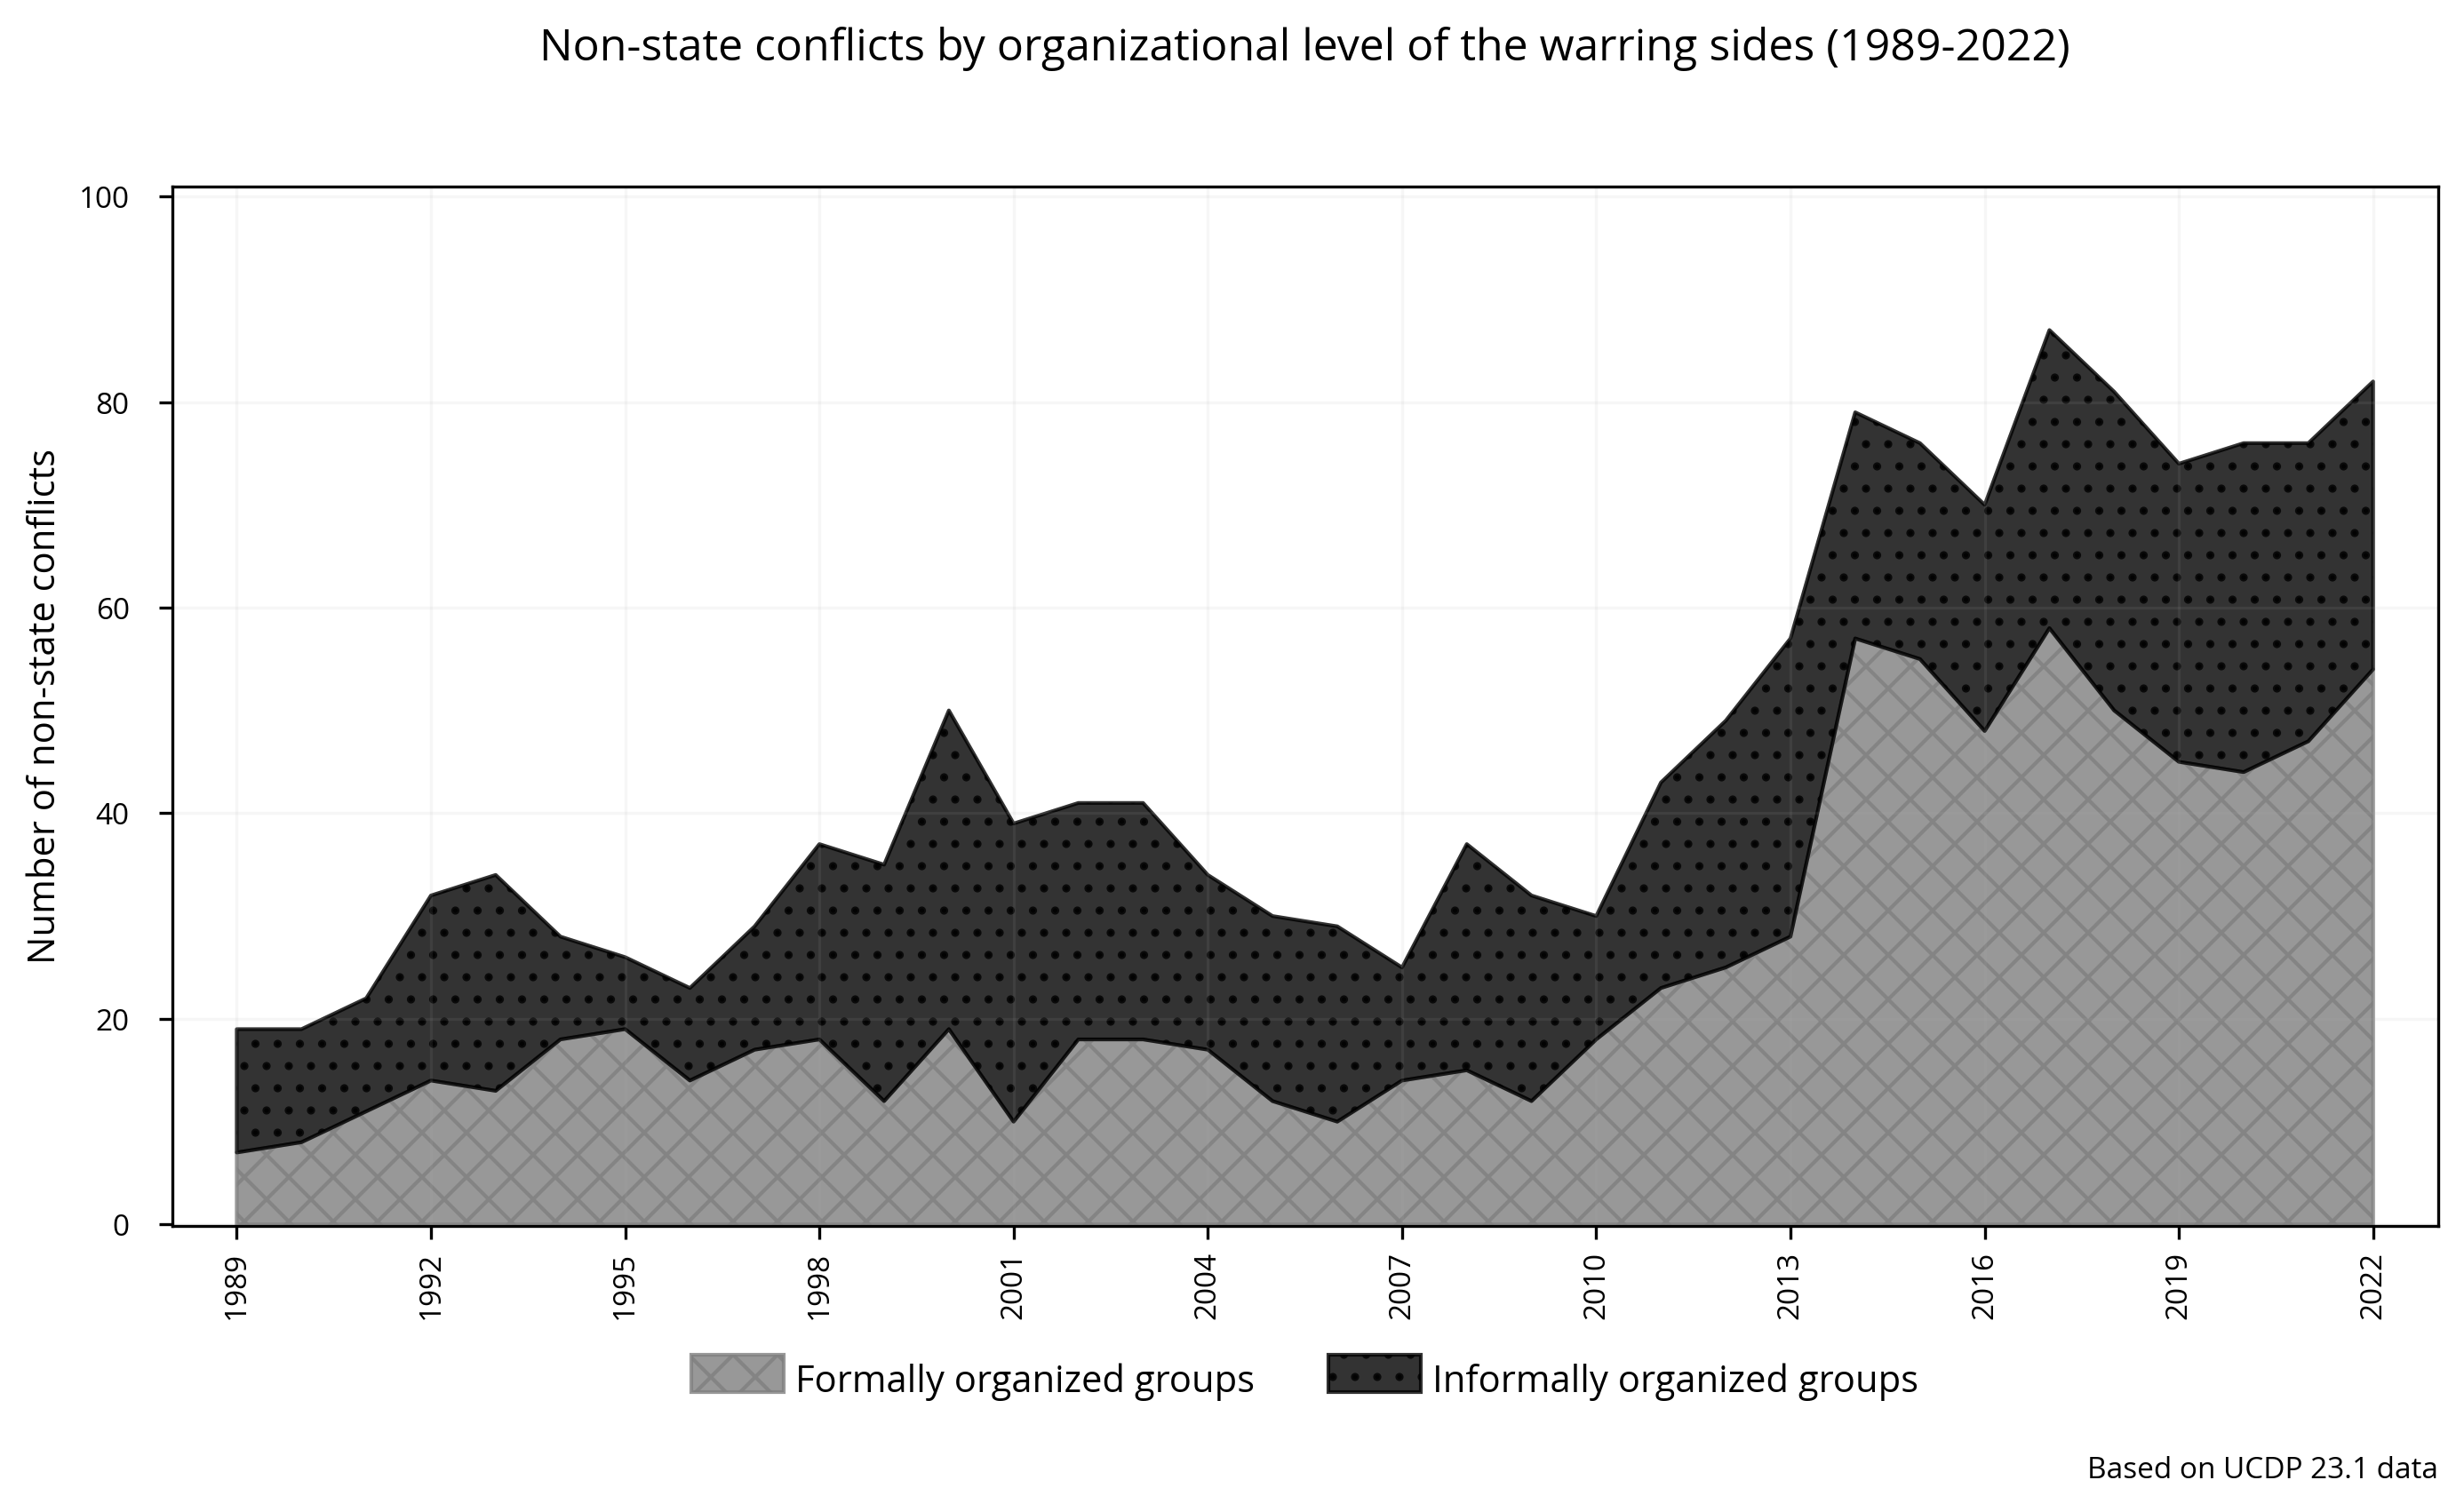 Non-state: Conflicts by organizational level of the warring sides